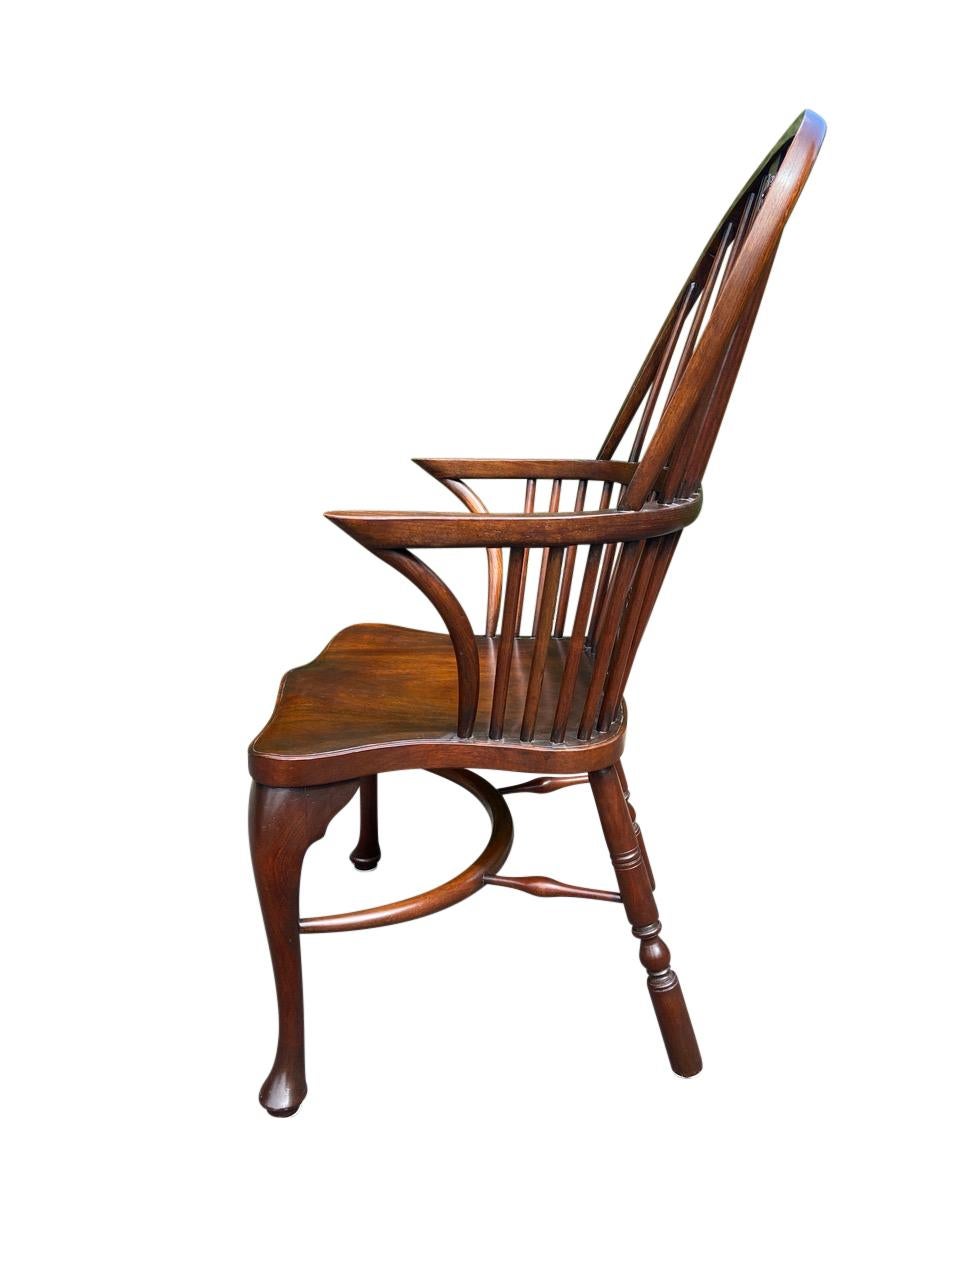 A George III style carved mahogany Royal Windsor armchair in the Hepplewhite style. This unusual model of Windsor chair dates from the early 20th century but is based on a period model. The splat is carved with neo-classical detailing of swags,